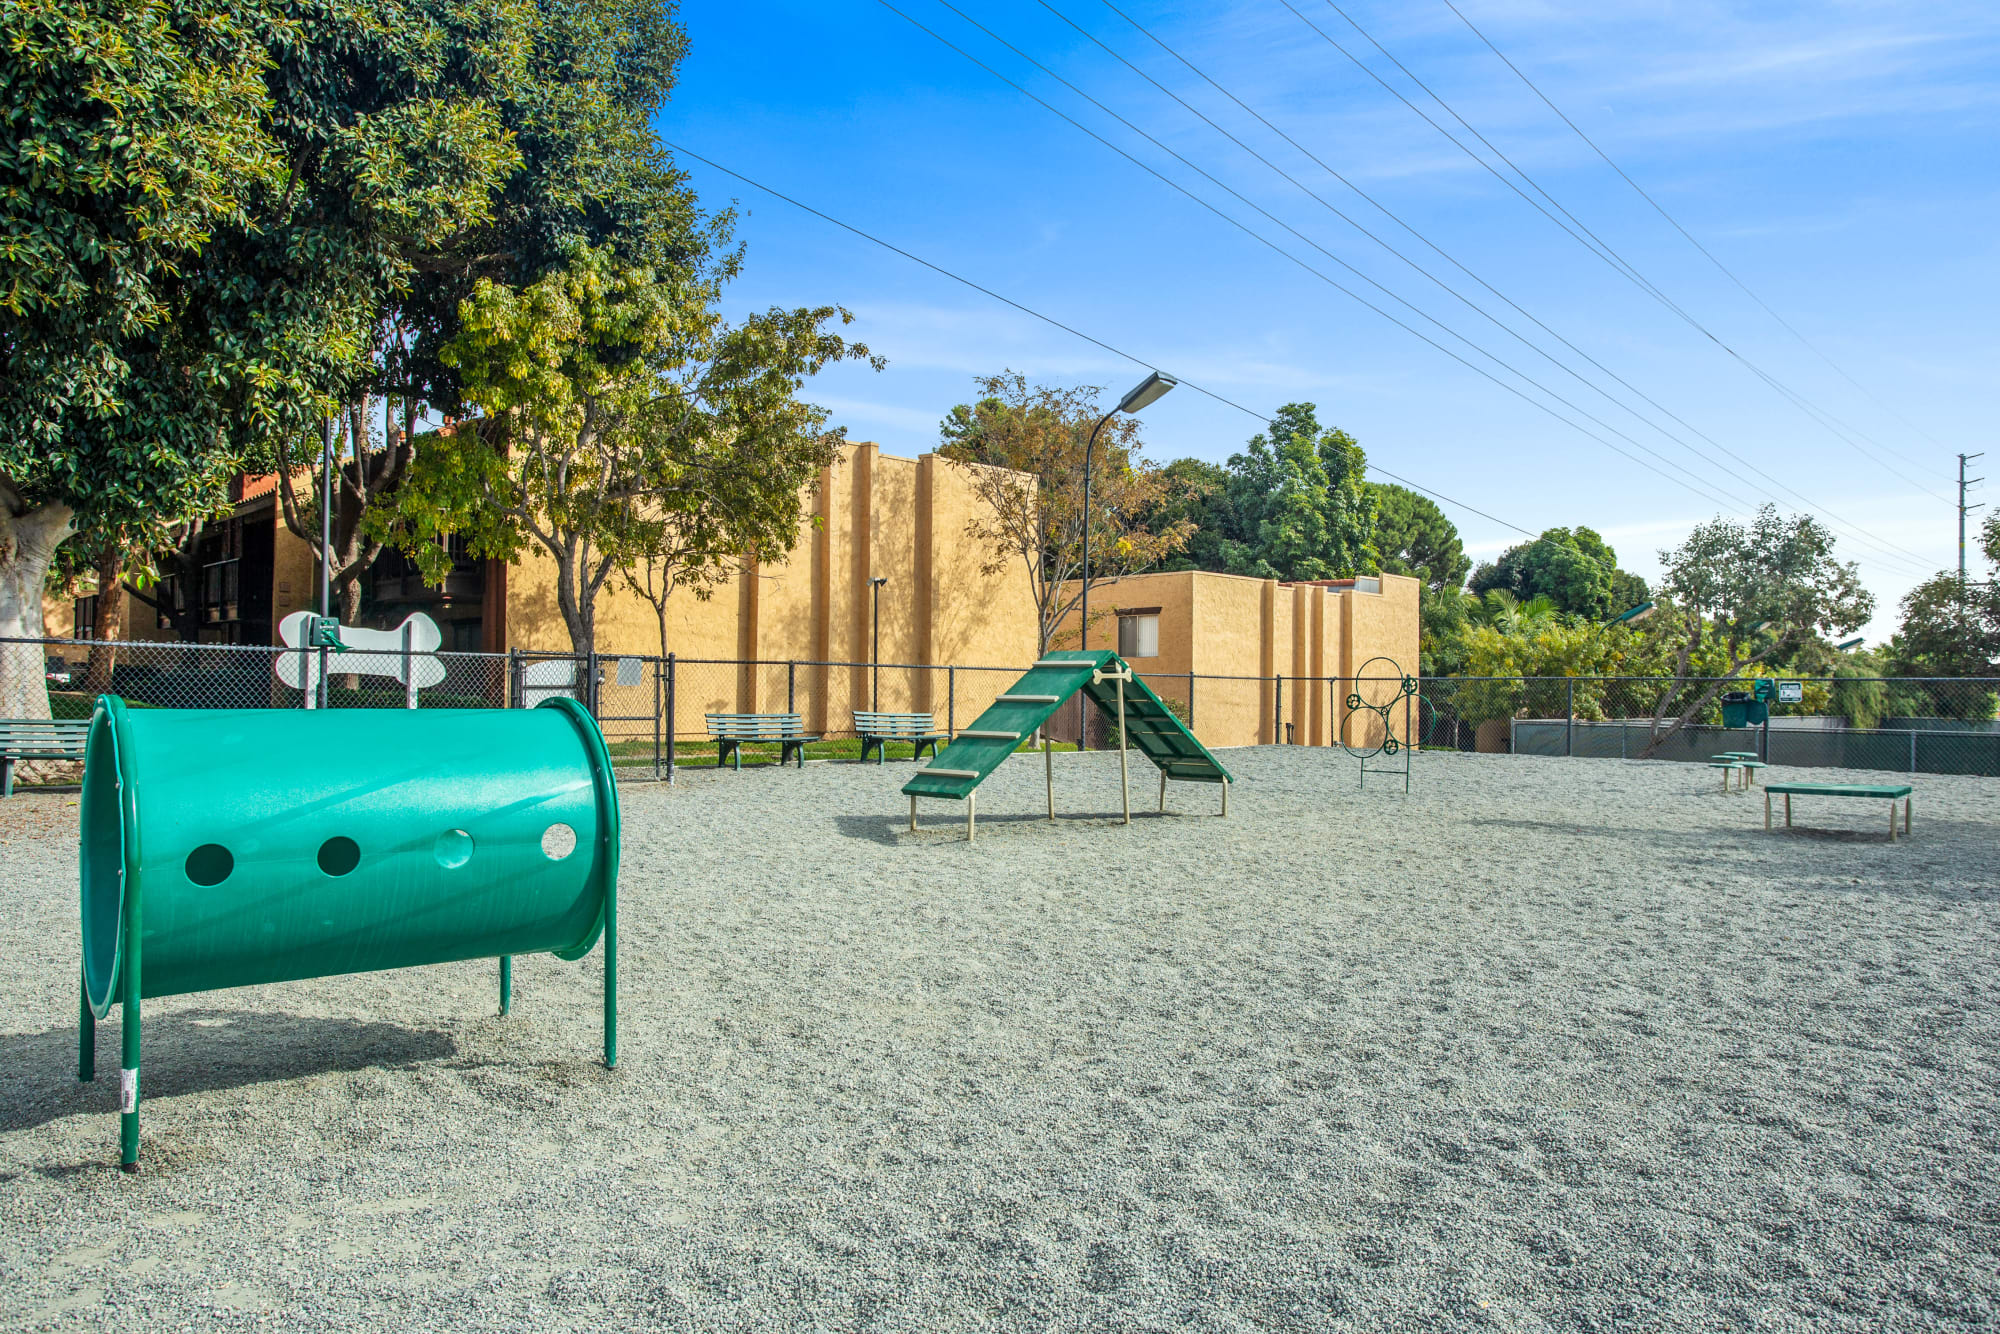 Off-leash dog park with toys at Shadow Ridge Apartments in Oceanside, California